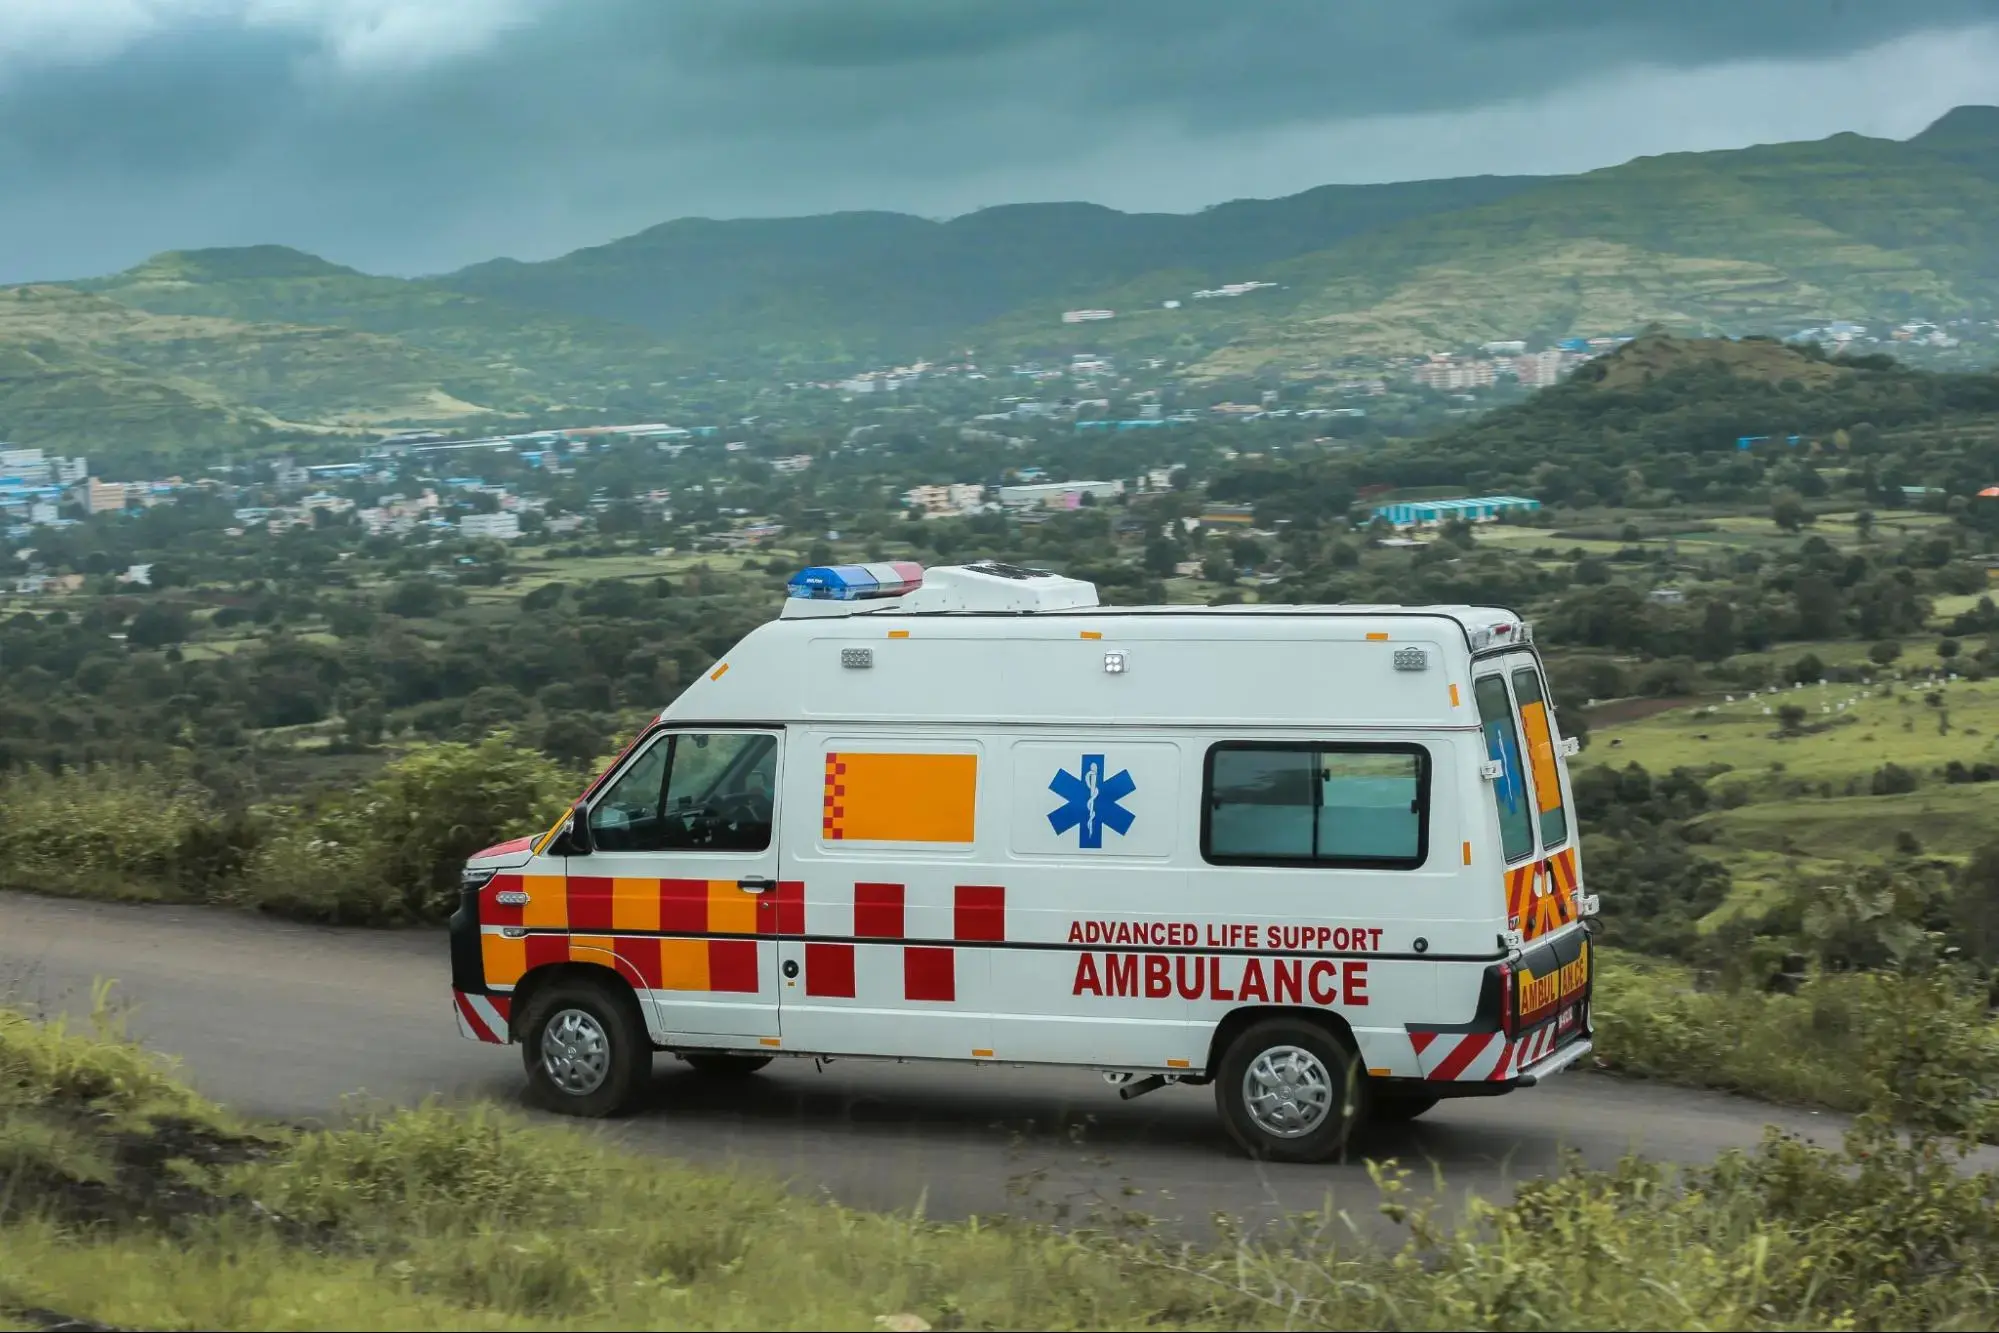 White Ambulance on the Road taking a patient to a medical emergency facility